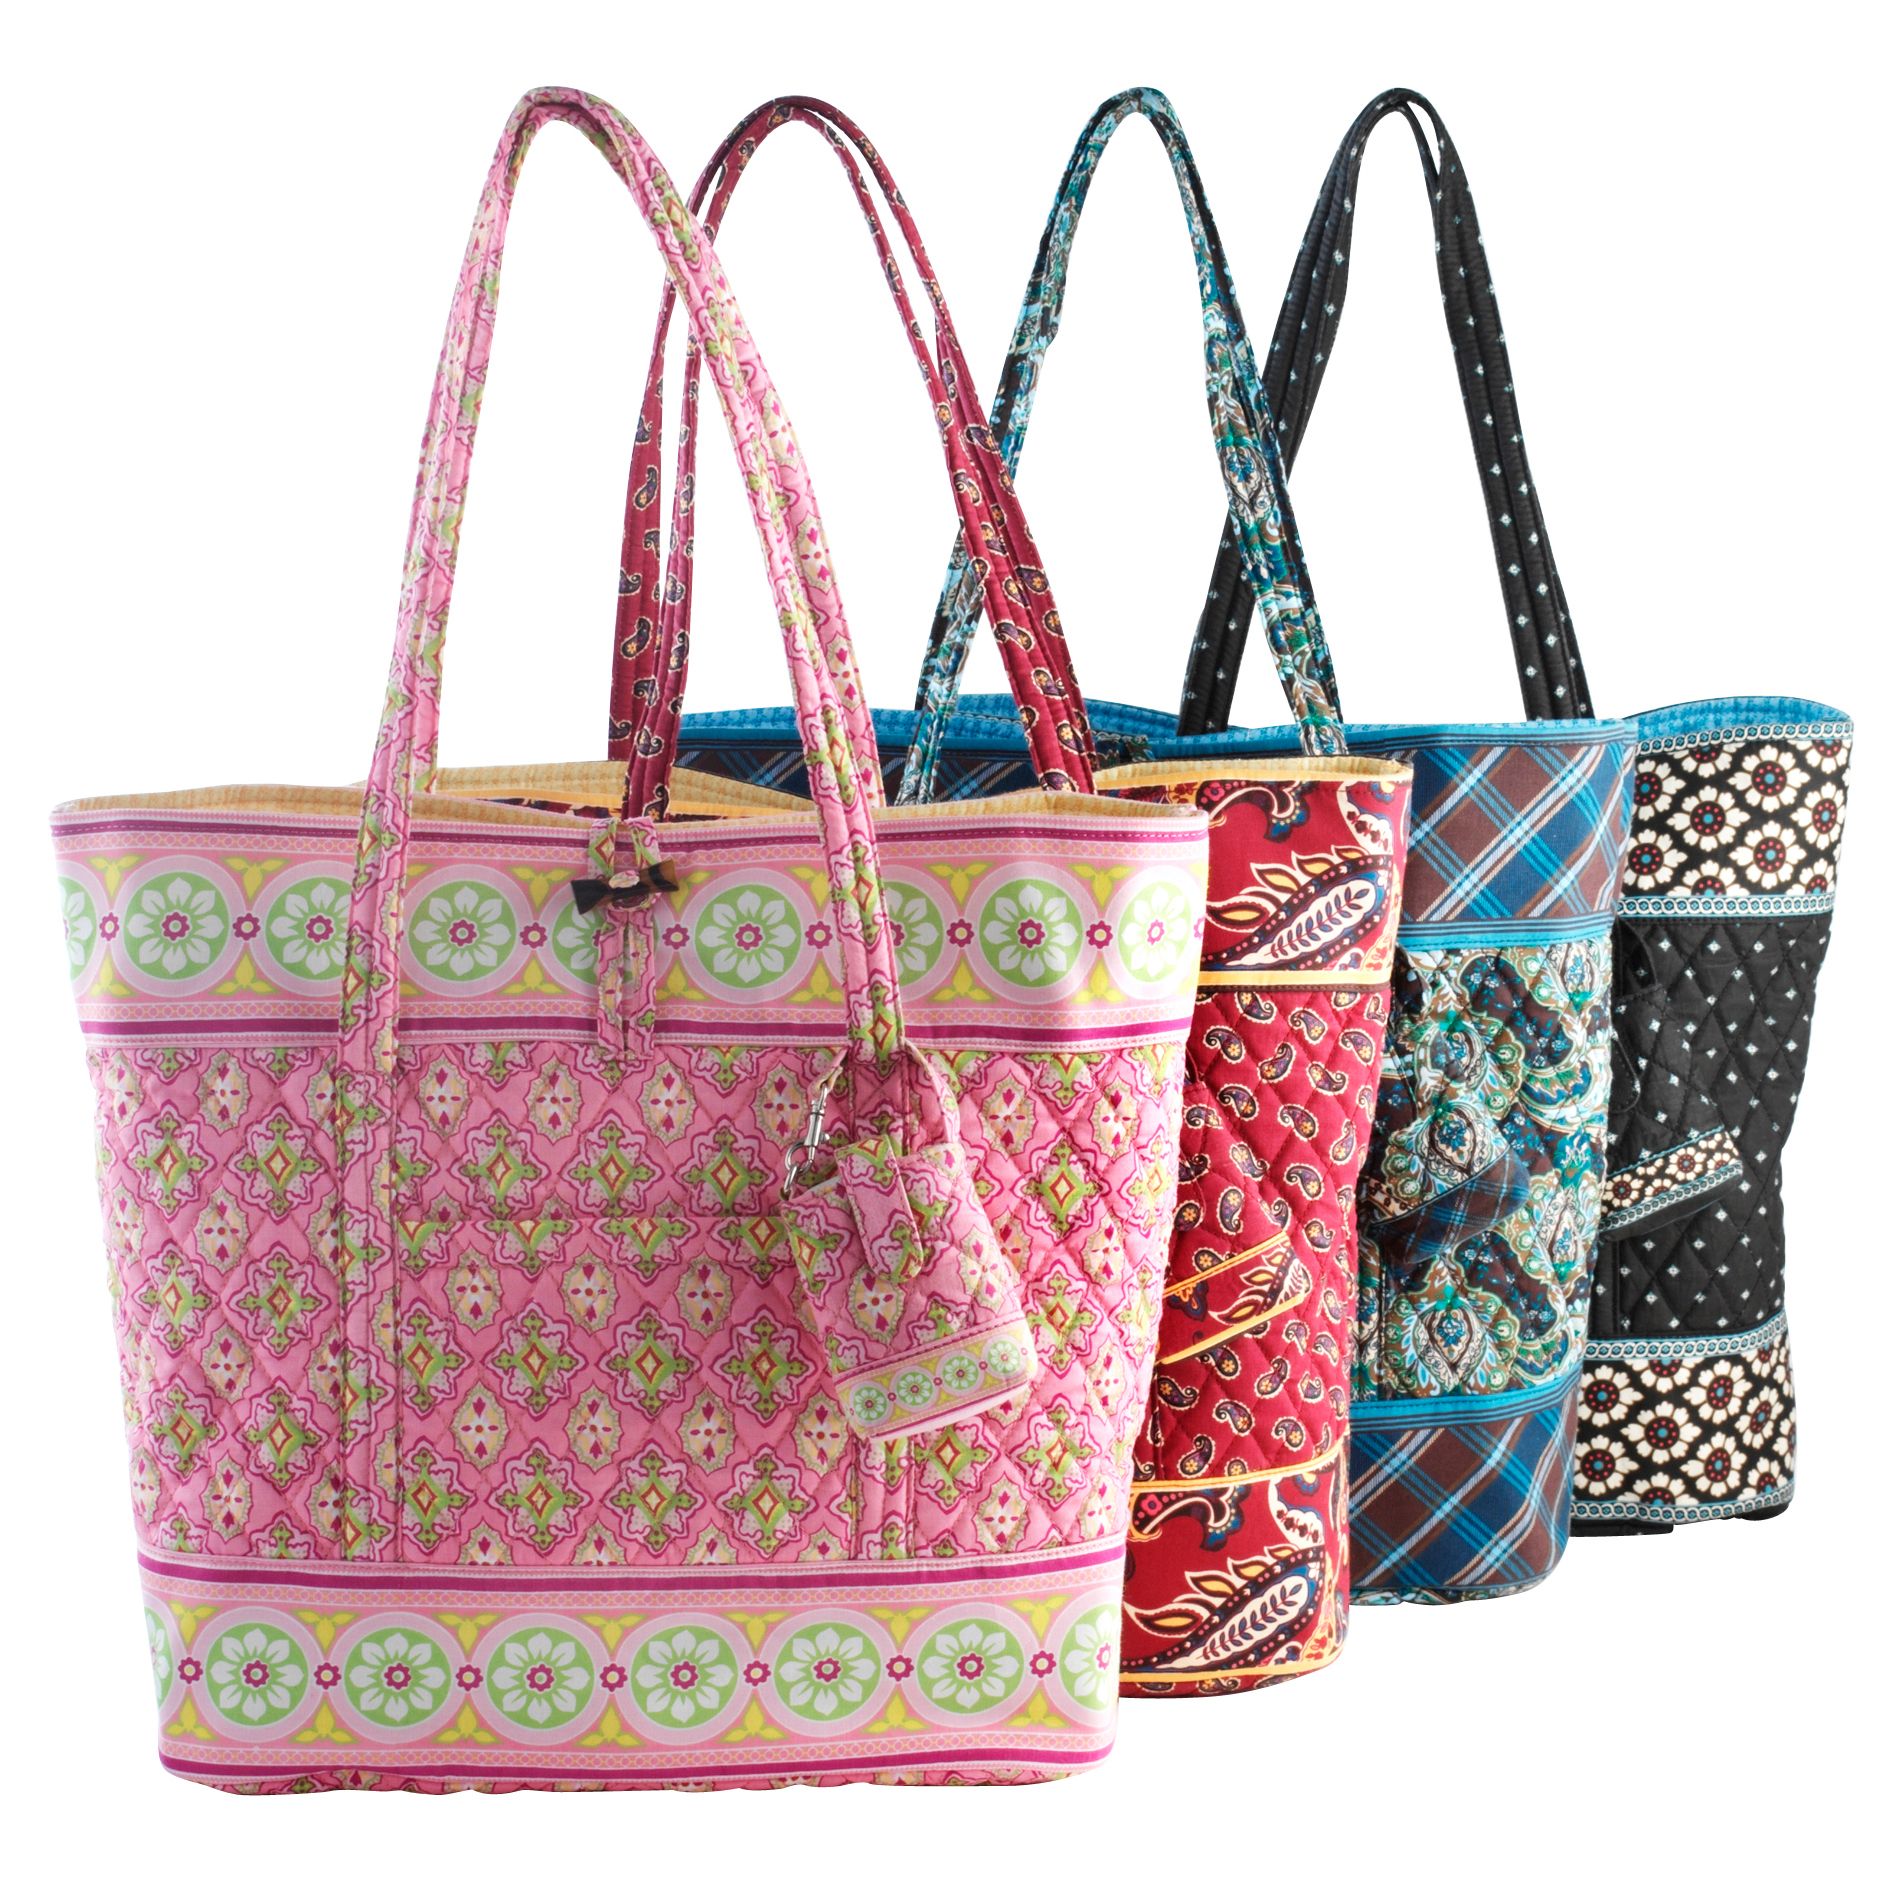 Rosetti Ivy Hill Travel Tote Collection